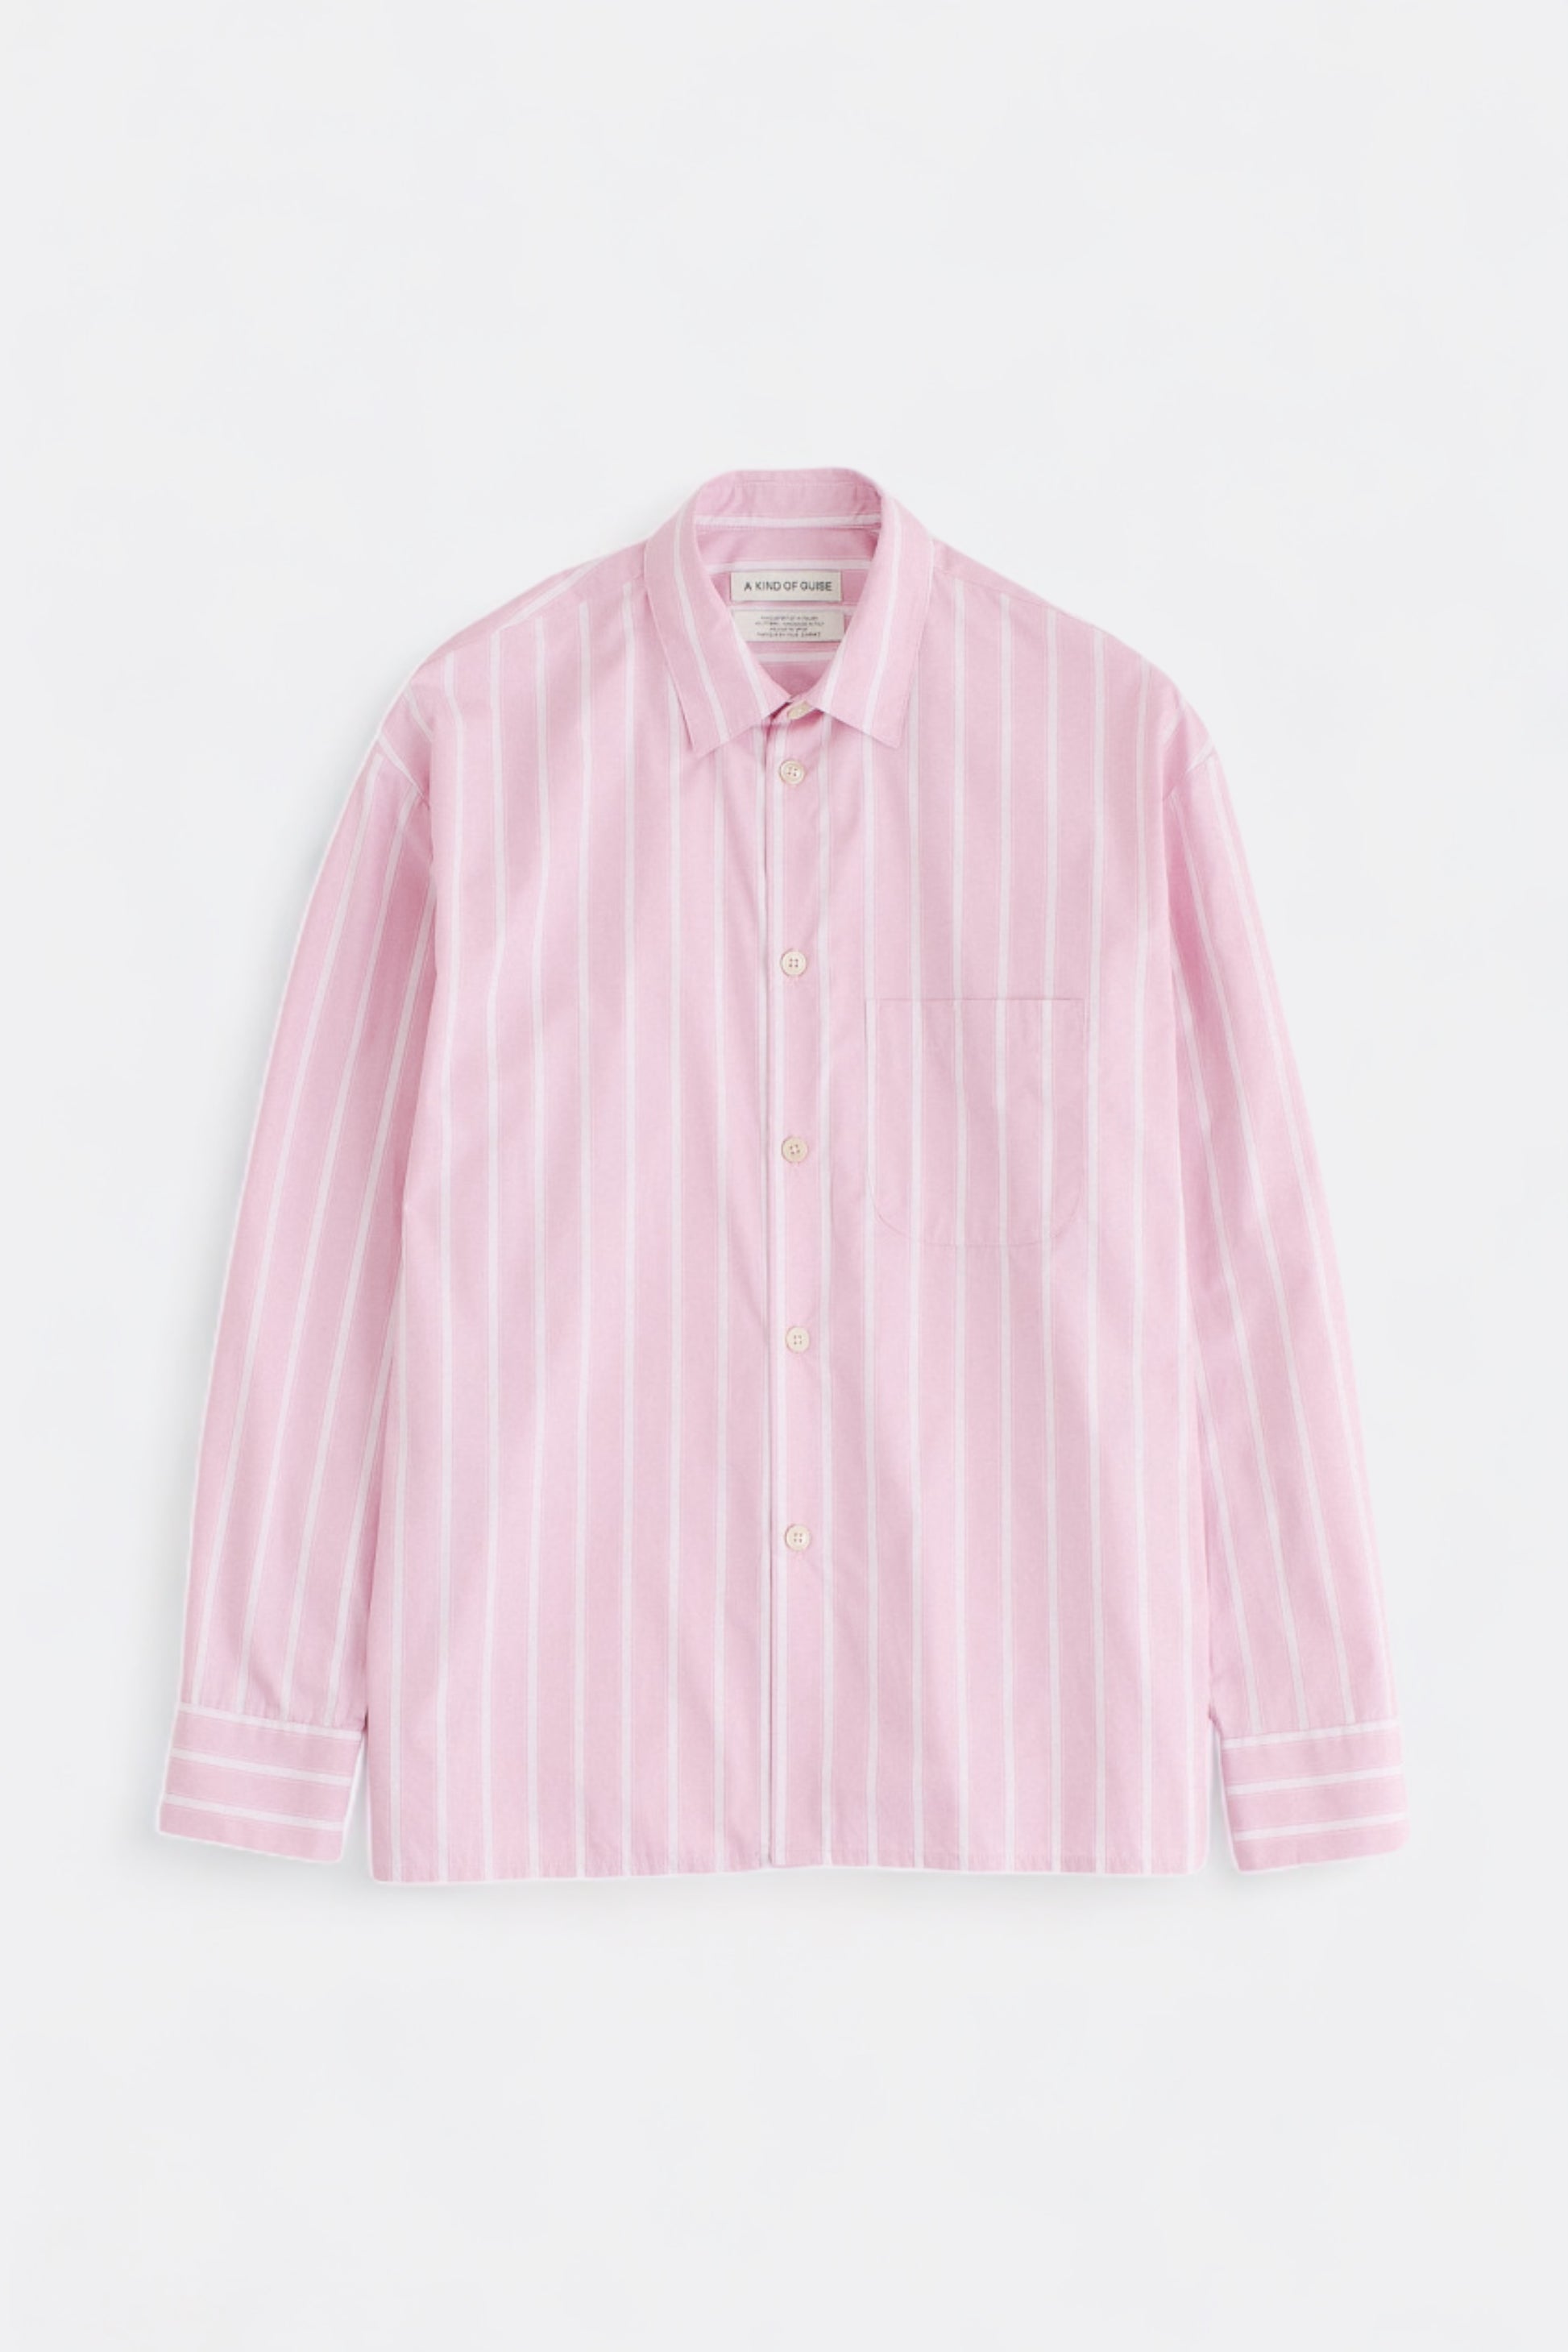 A Kind Of Guise - Gusto Shirt (Cherryblossom Stripe)